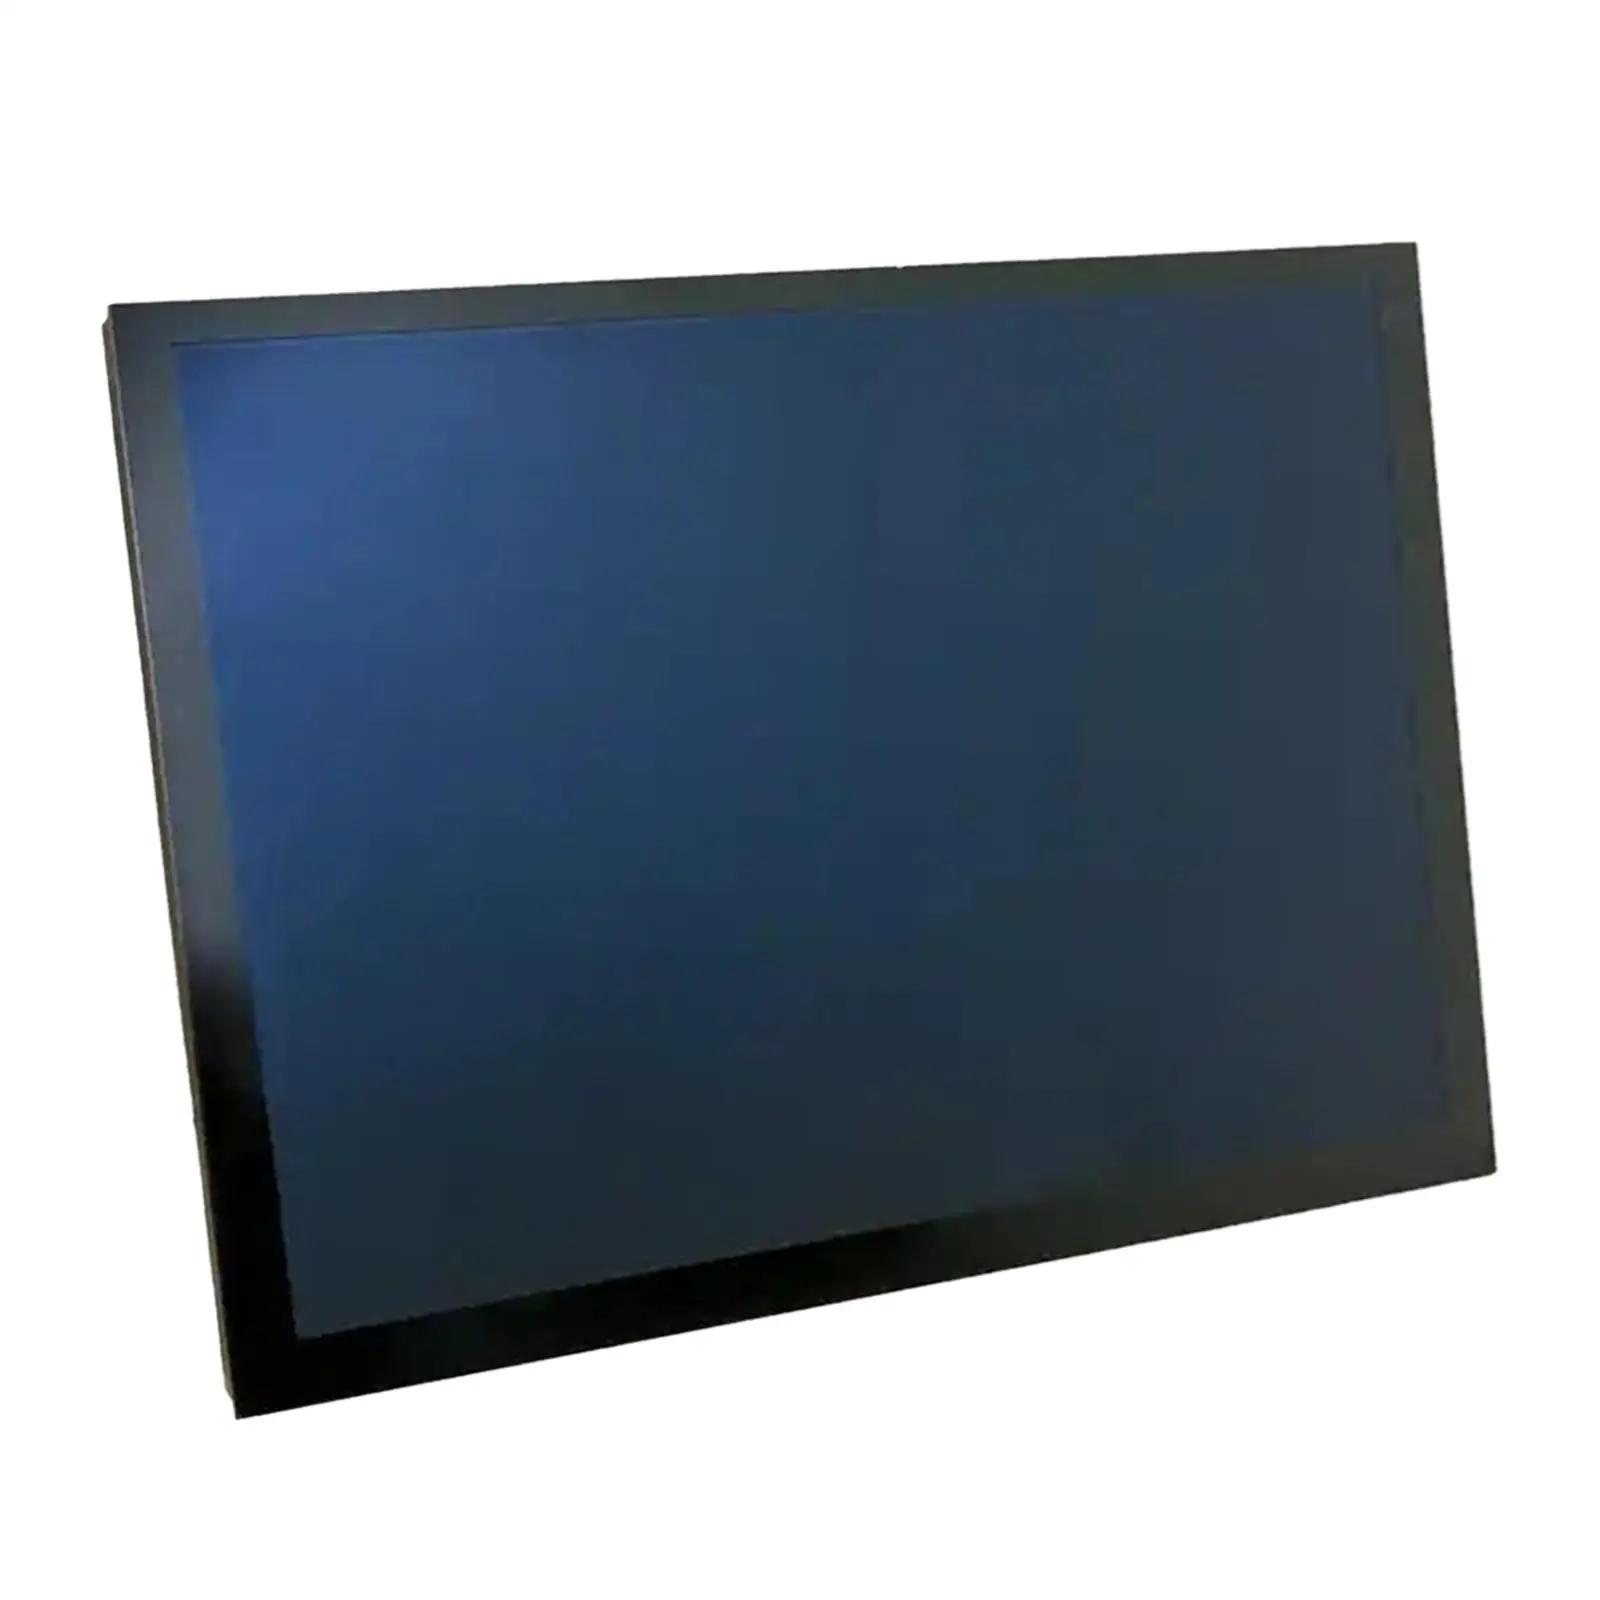 8.4 Inches Touch Screen LA084x01 Replace Parts Display Screen for Dodge